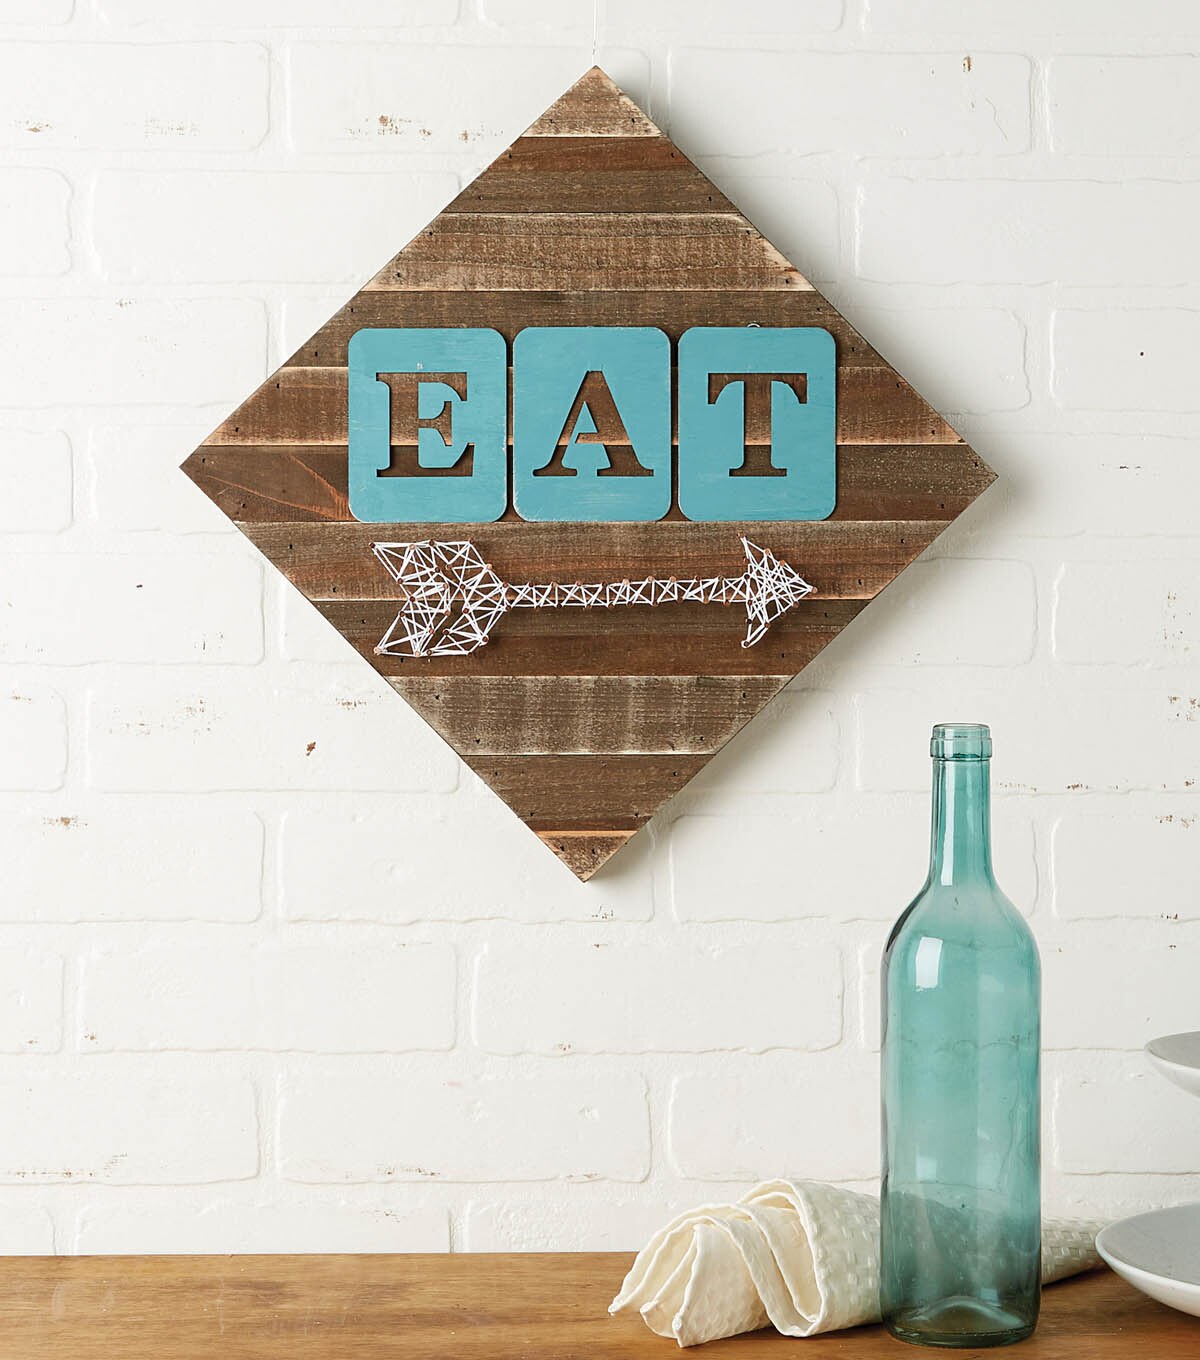 How To Make A Tin Eat Pallet And String Art Joann